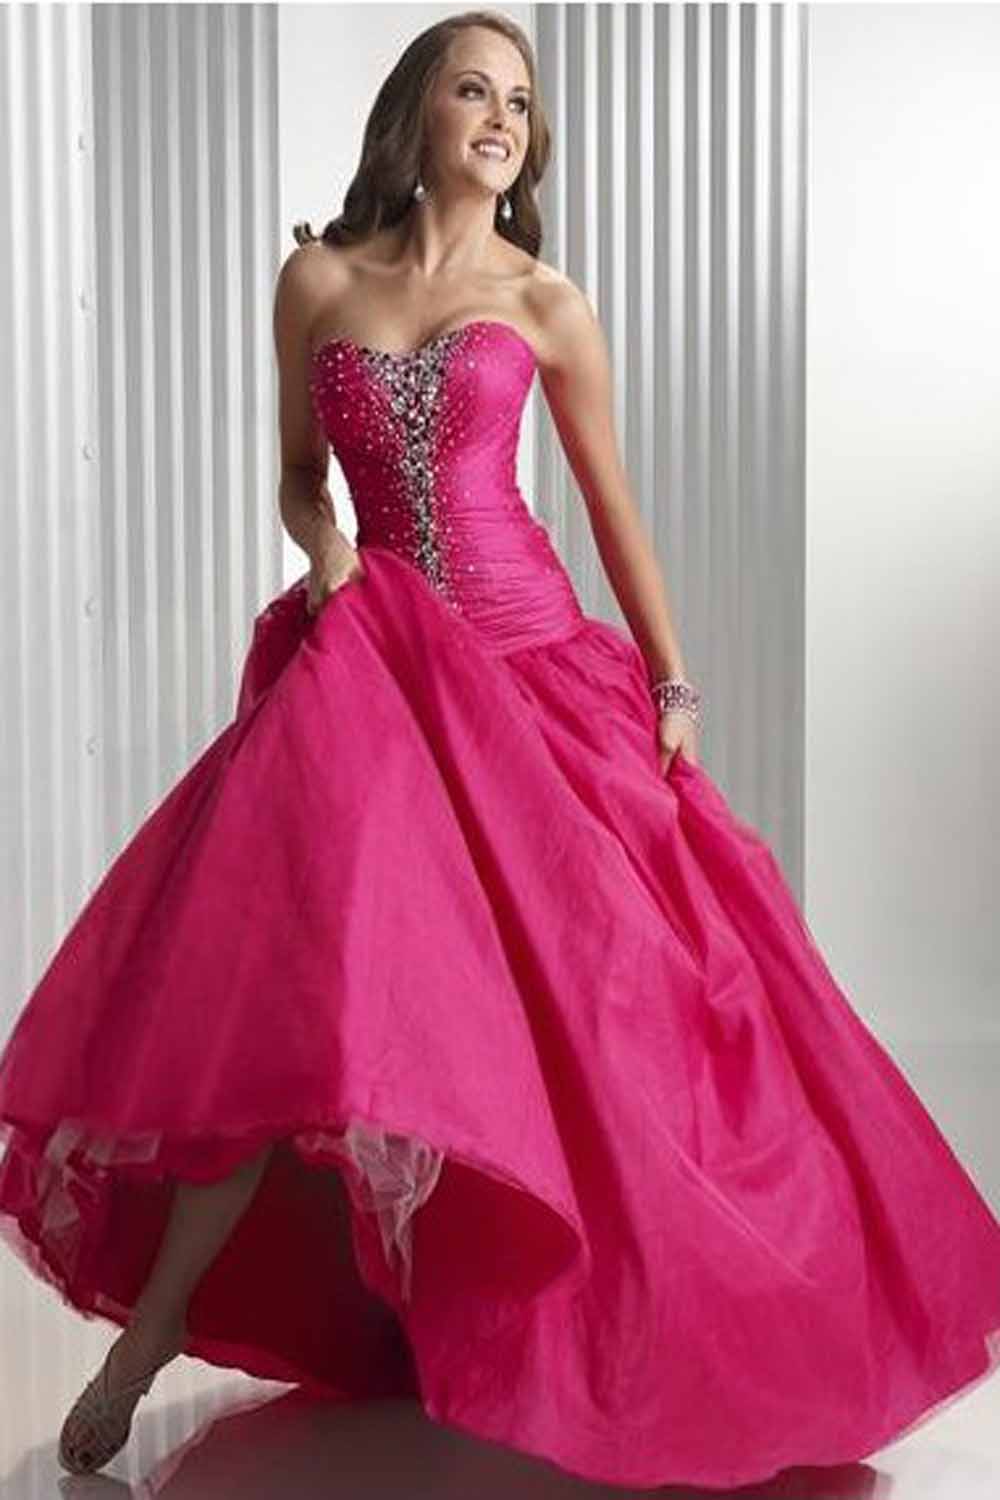 Design Your Own Prom Dress Ideas